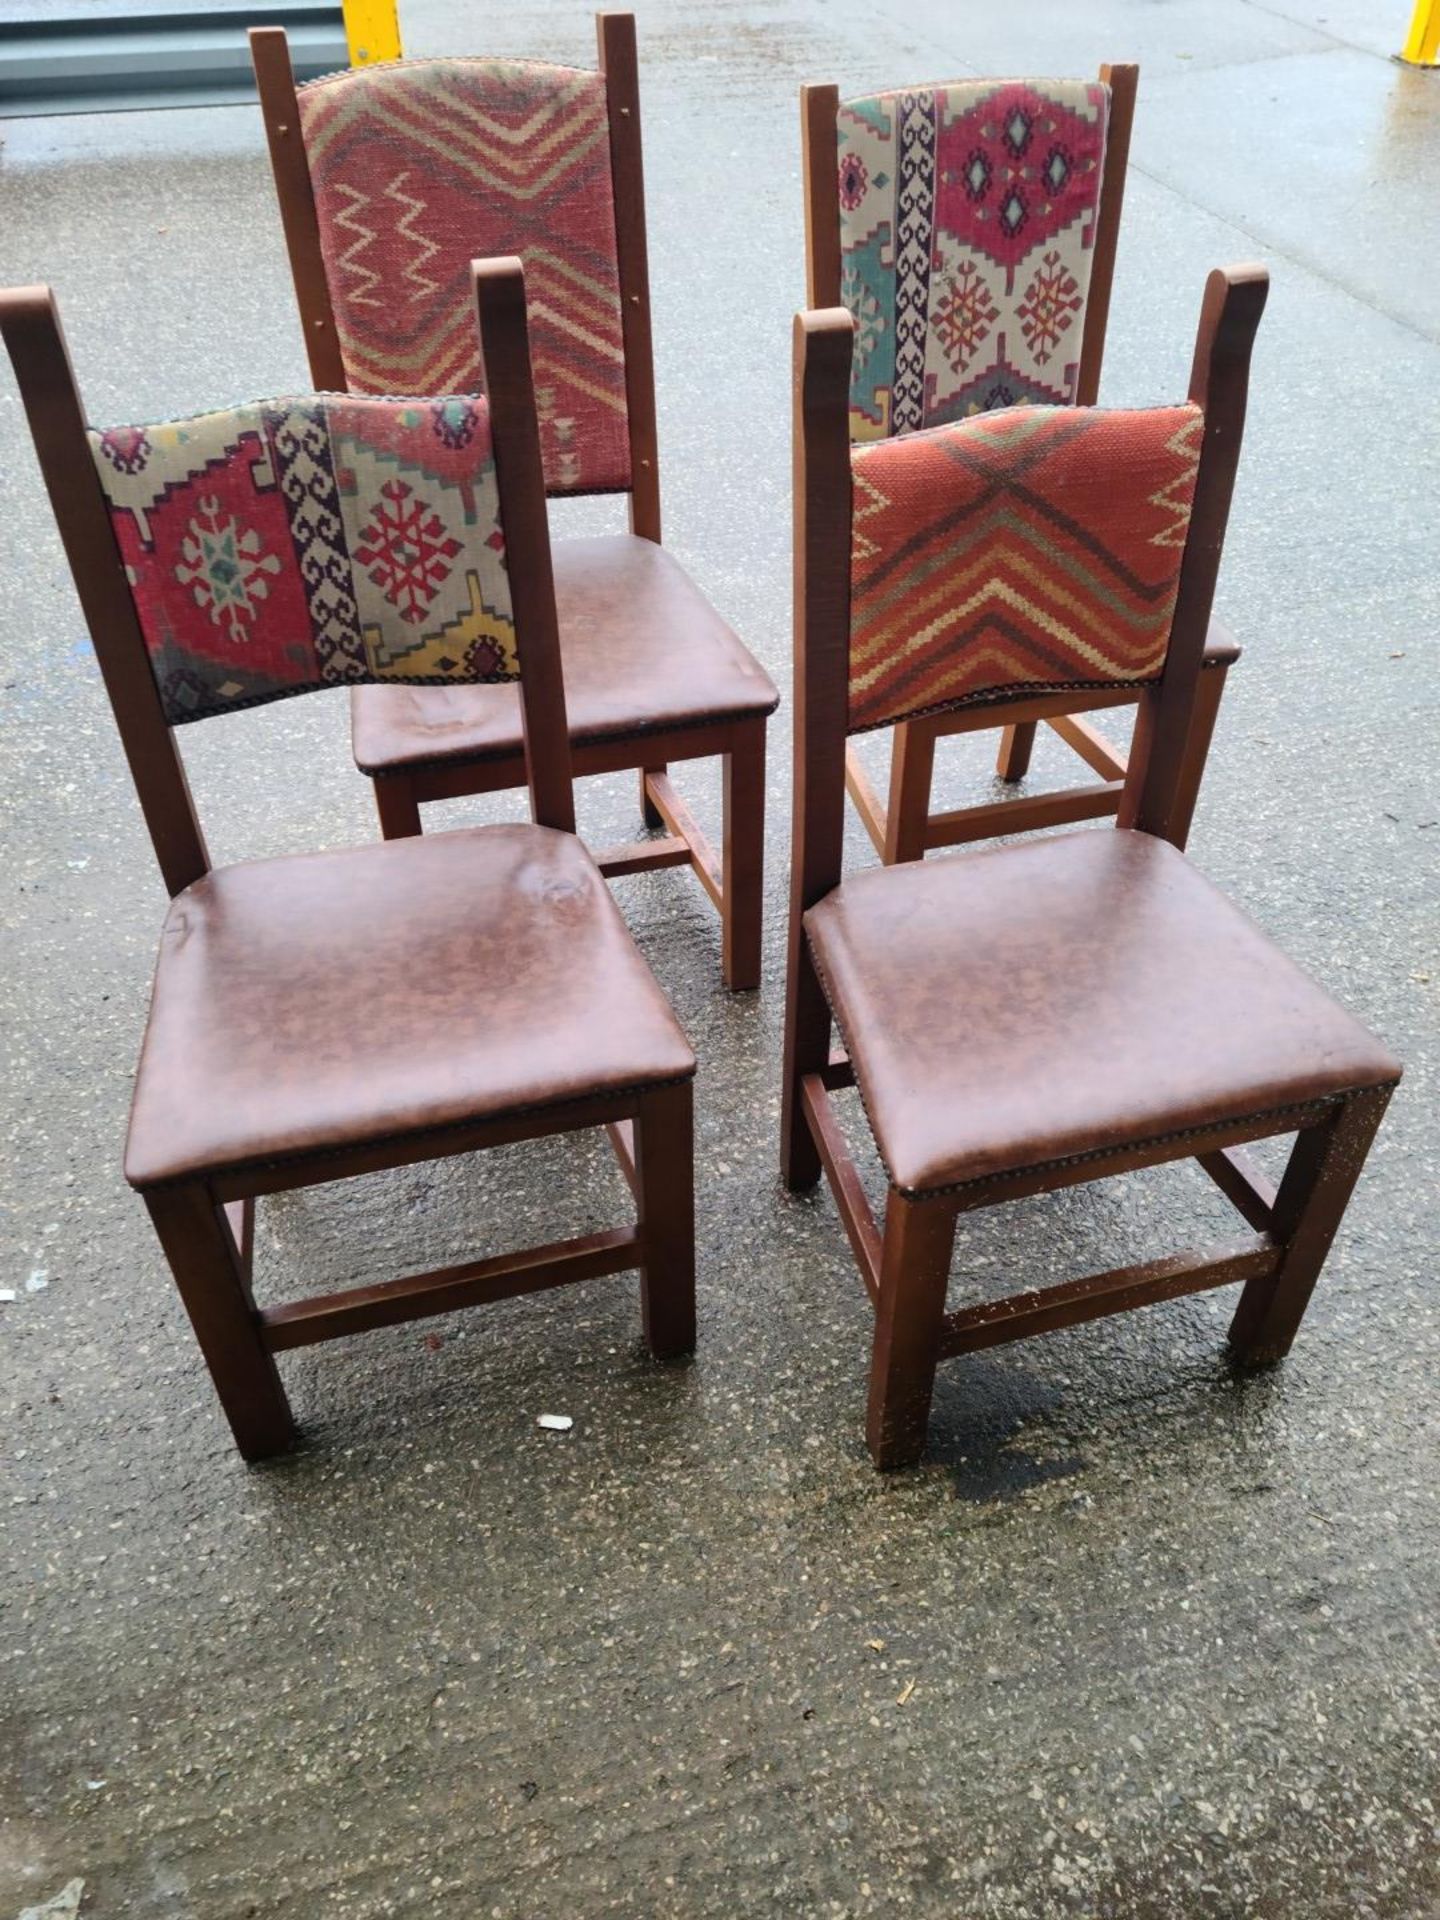 Set Of 4 x Aztec Print Dining Chairs With Faux Brown Leather Seating & Studded Seams - Image 4 of 5